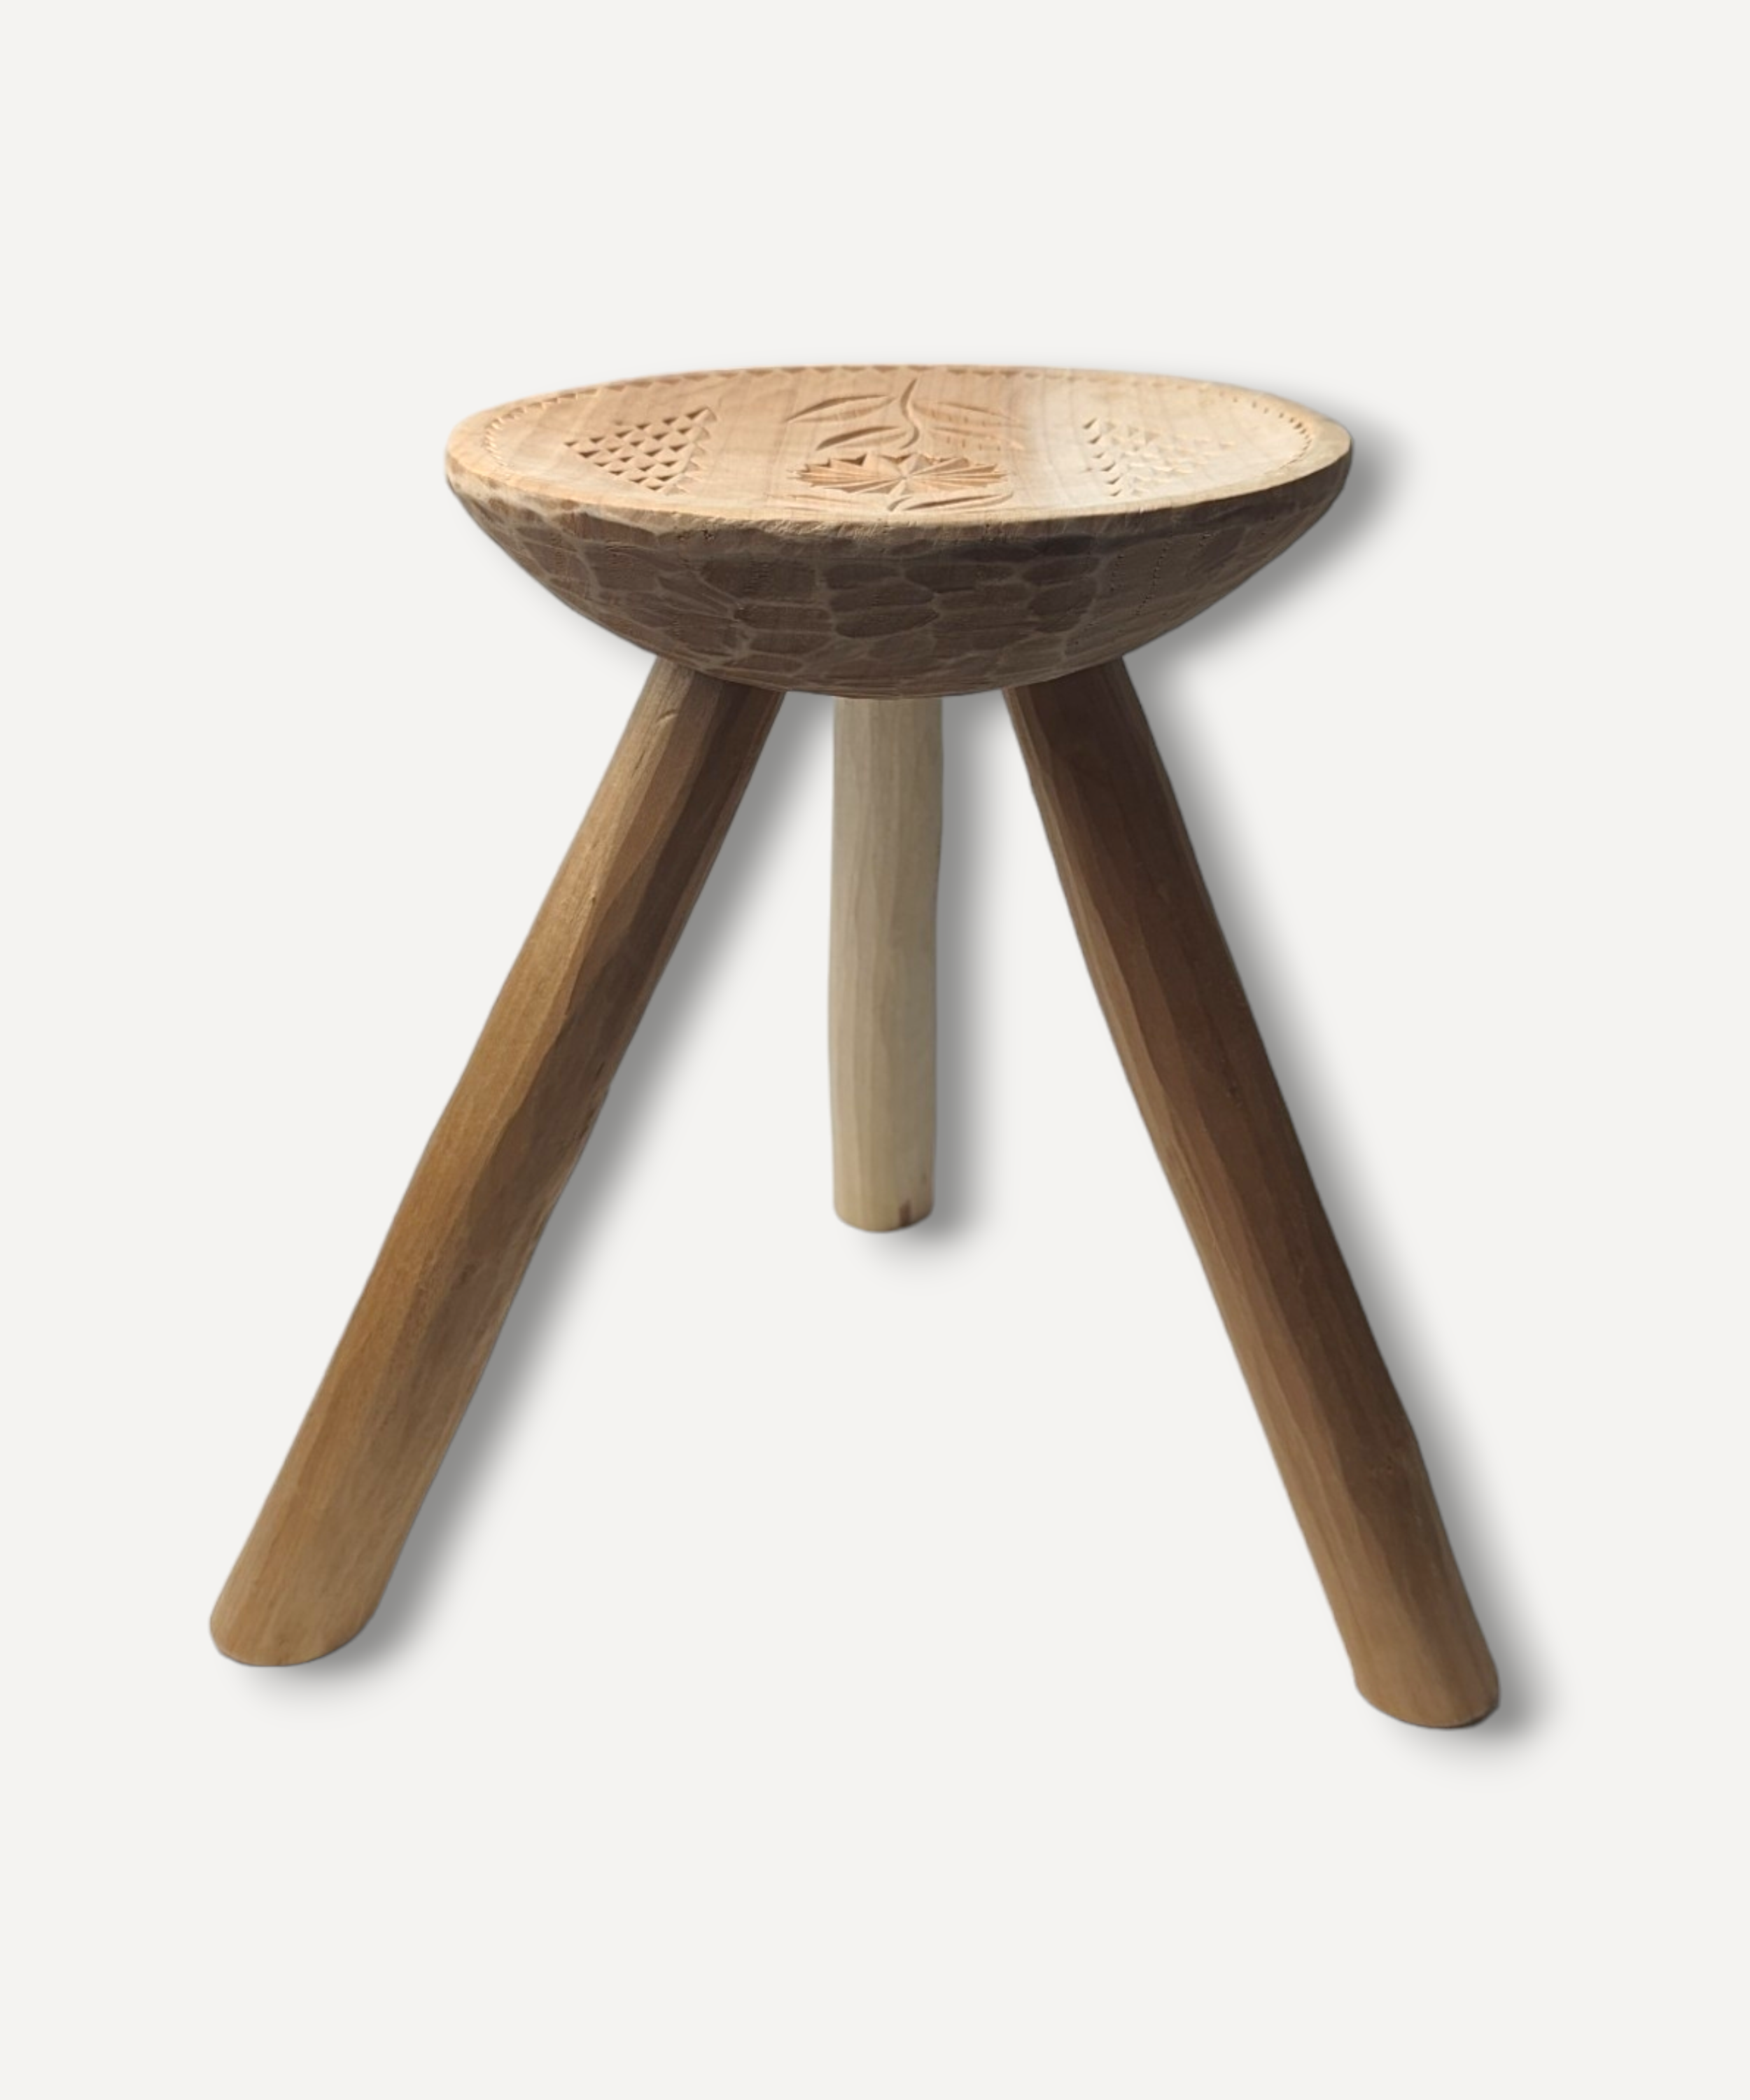 Wooden Stool with Motif